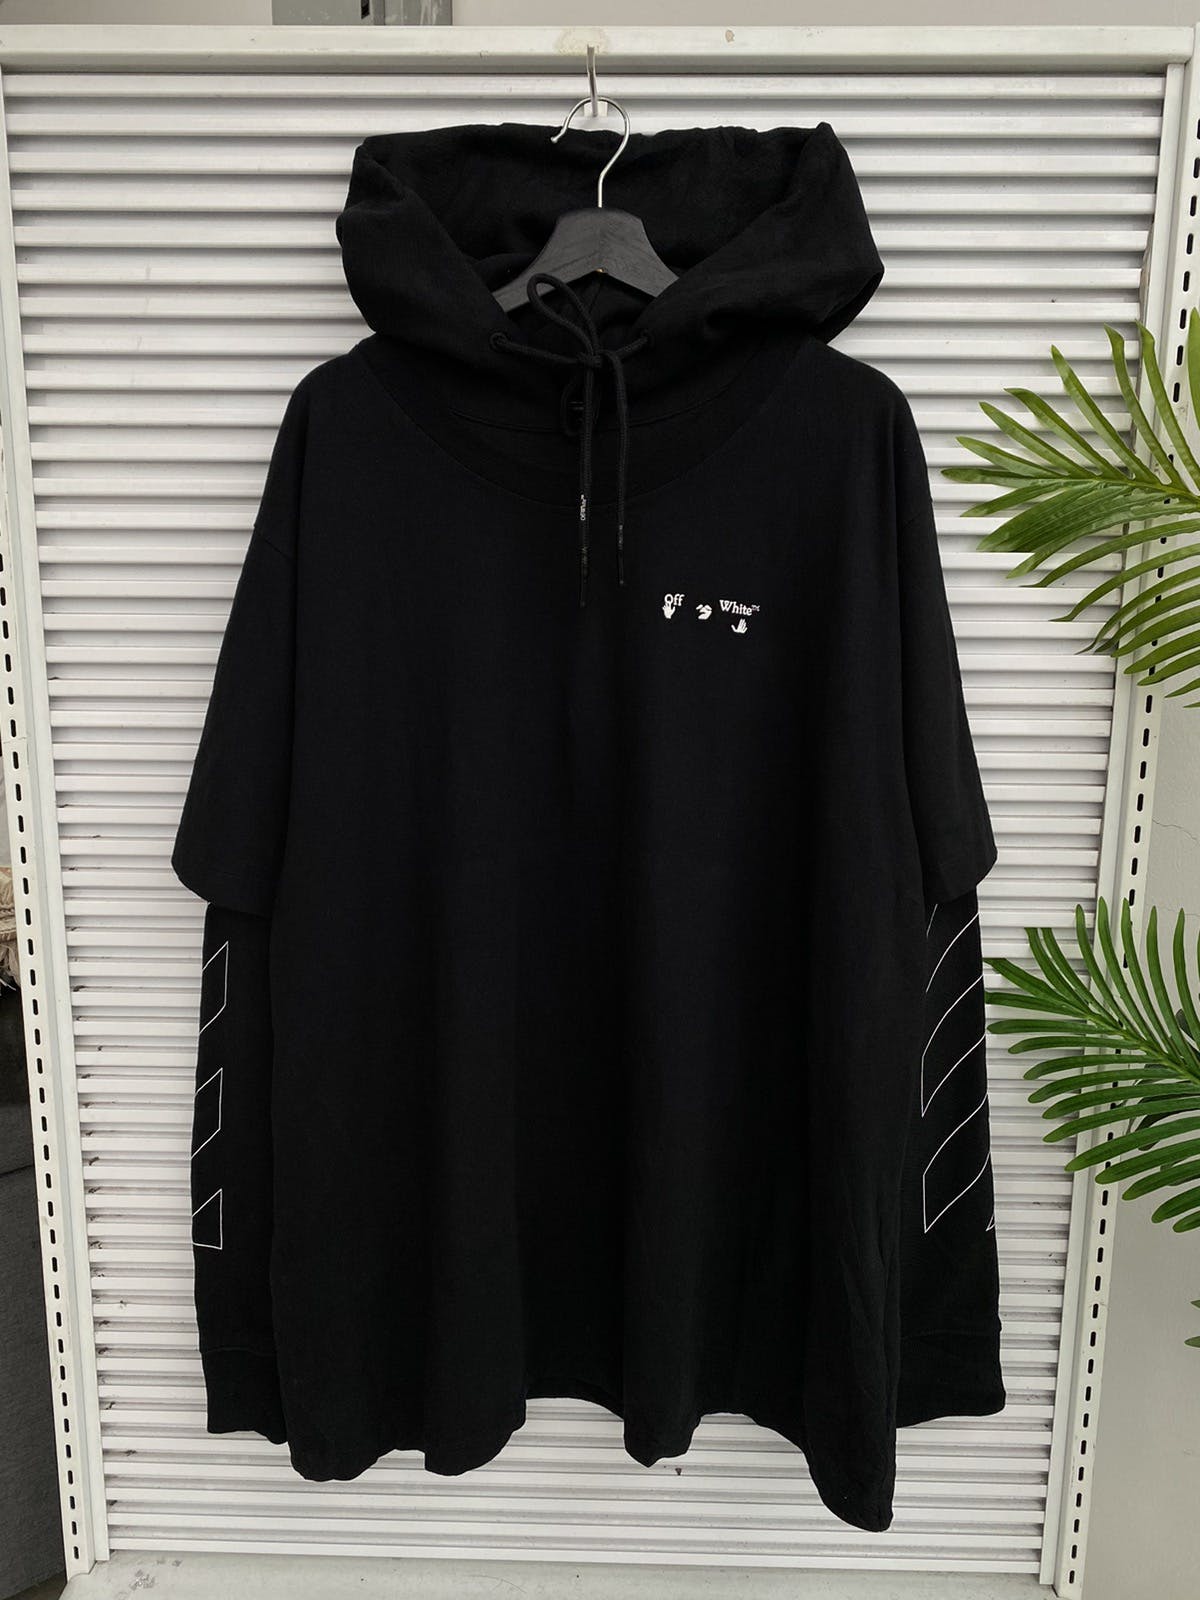 Off-White Virgil Abloh Hoodie Double Layer Connected T-Shirt - 1